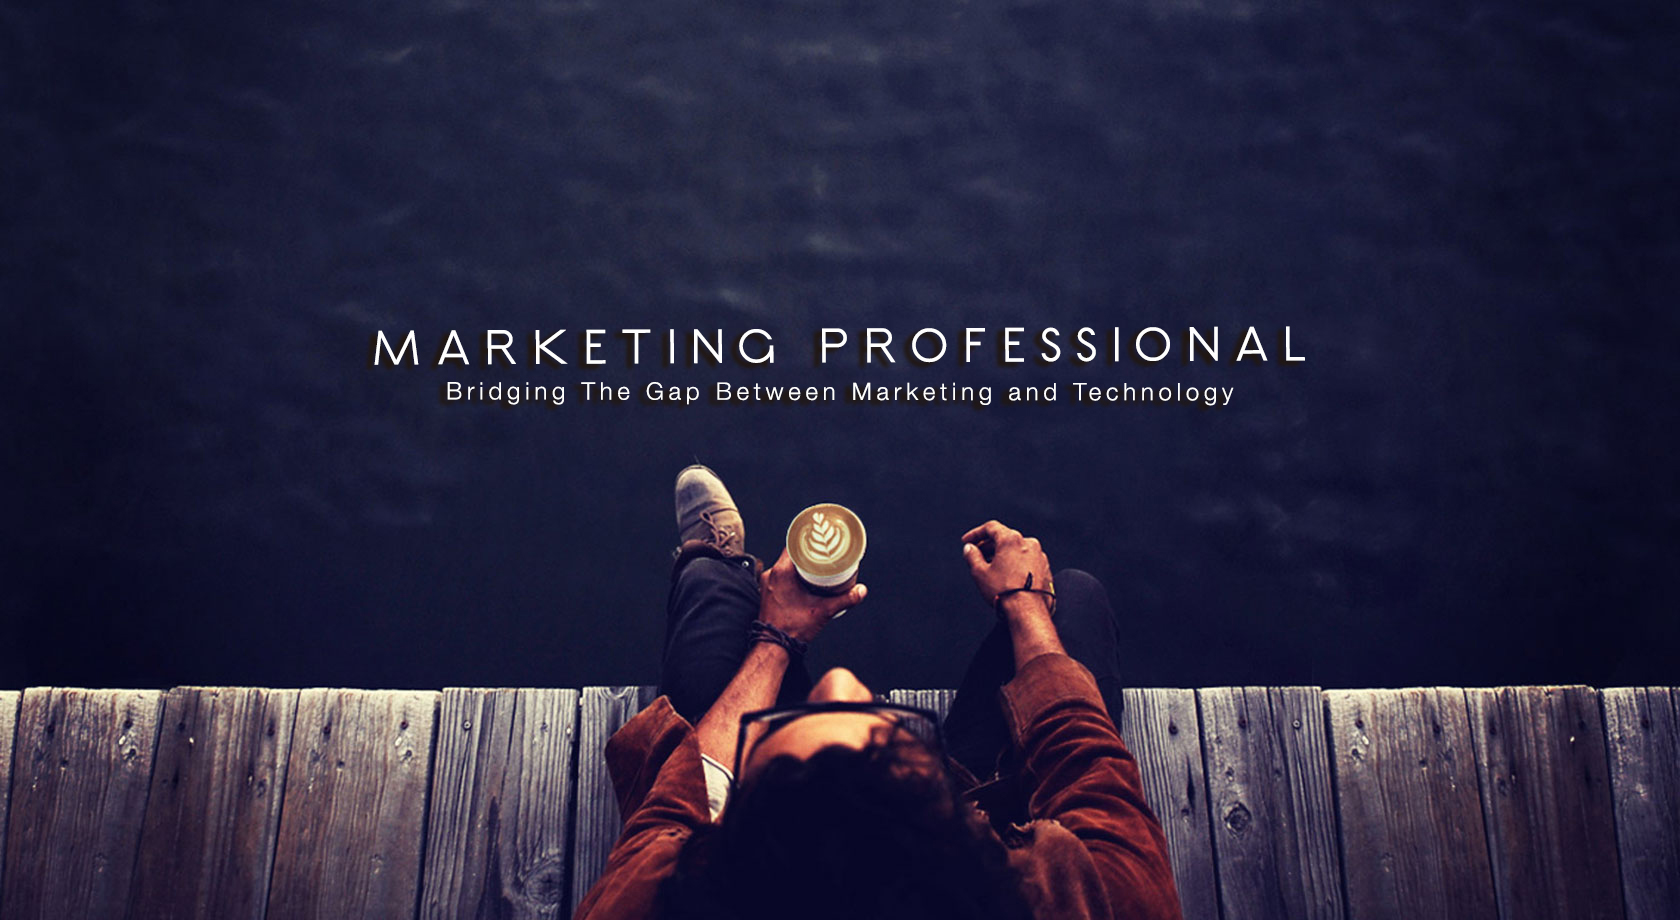 Bridging The Gap Between Marketing and Technology